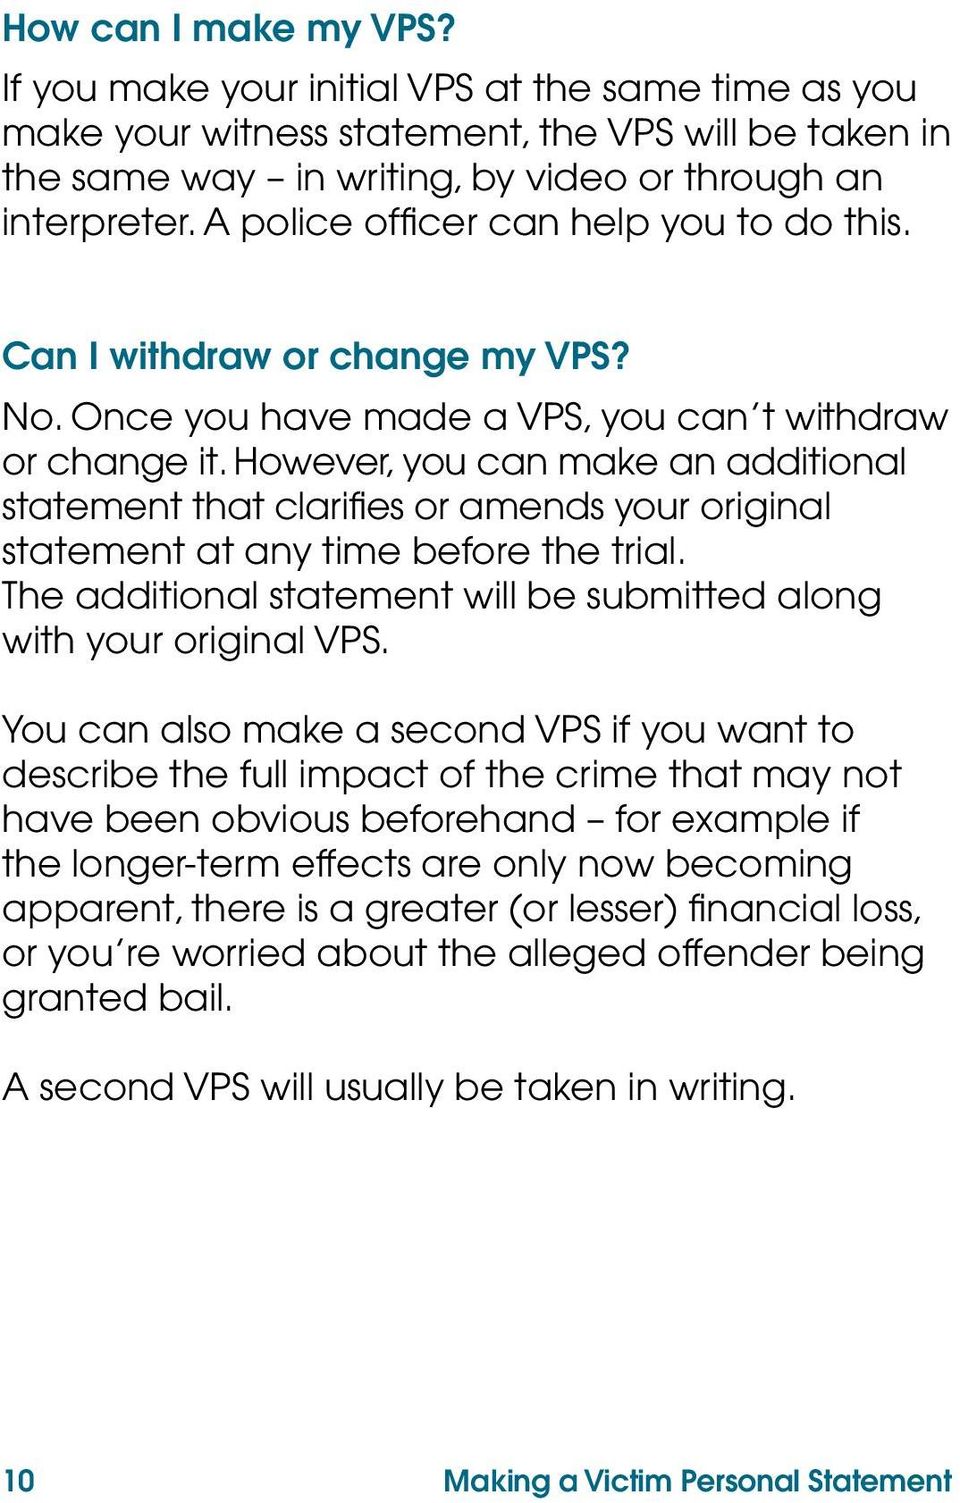 However, you can make an additional statement that clarifies or amends your original statement at any time before the trial. The additional statement will be submitted along with your original VPS.